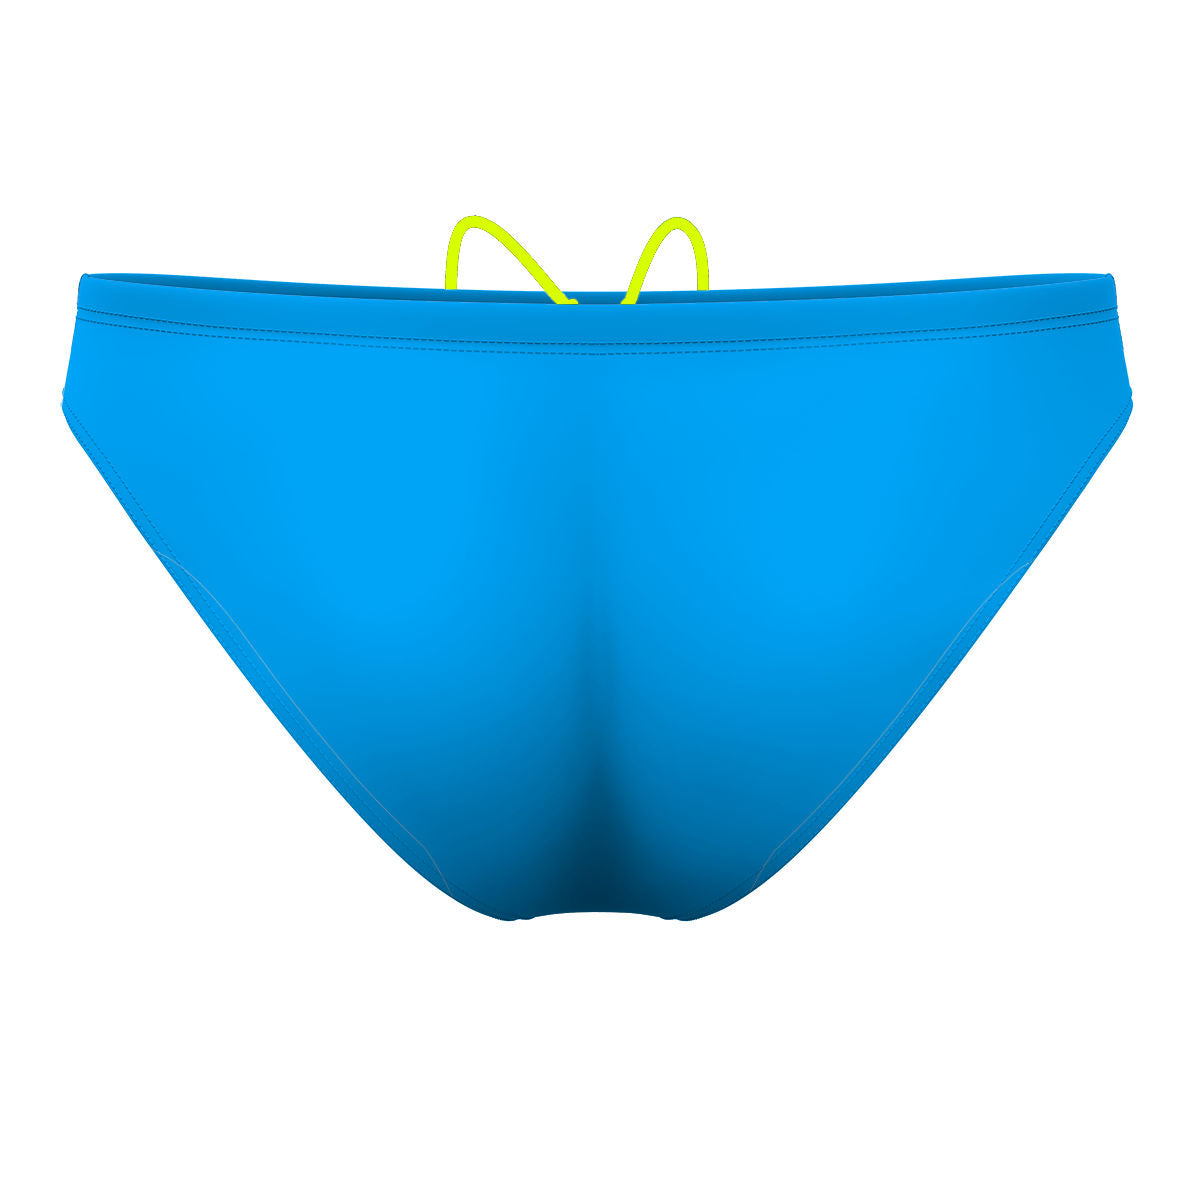 03/30/2023 - Waterpolo Brief Swimsuit